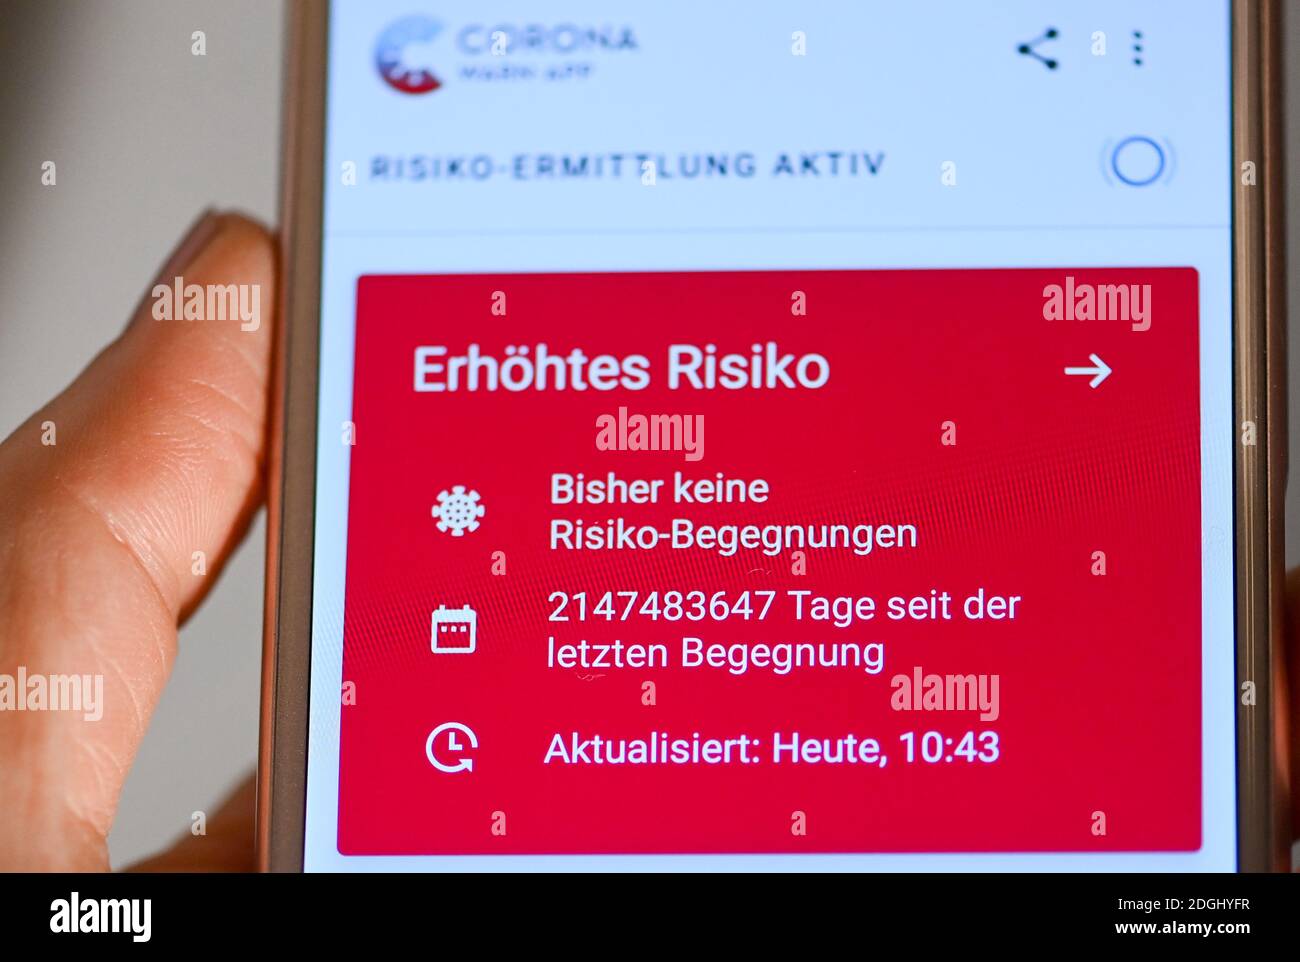 06 December 2020, Berlin: On a smartphone, the open Corona warning app with red display indicates an increased risk despite no risk encounter. In addition, an unreasonable number of days since the last encounter are displayed. The data is obviously displayed incorrectly. The Corona-Warn-App works with several parameters to determine the risk, the most important of which is the duration of contact with a person who is later tested corona-positive and the distance to this person. Encounters lasting less than ten minutes are generally considered harmless, as are those in which both persons were a Stock Photo